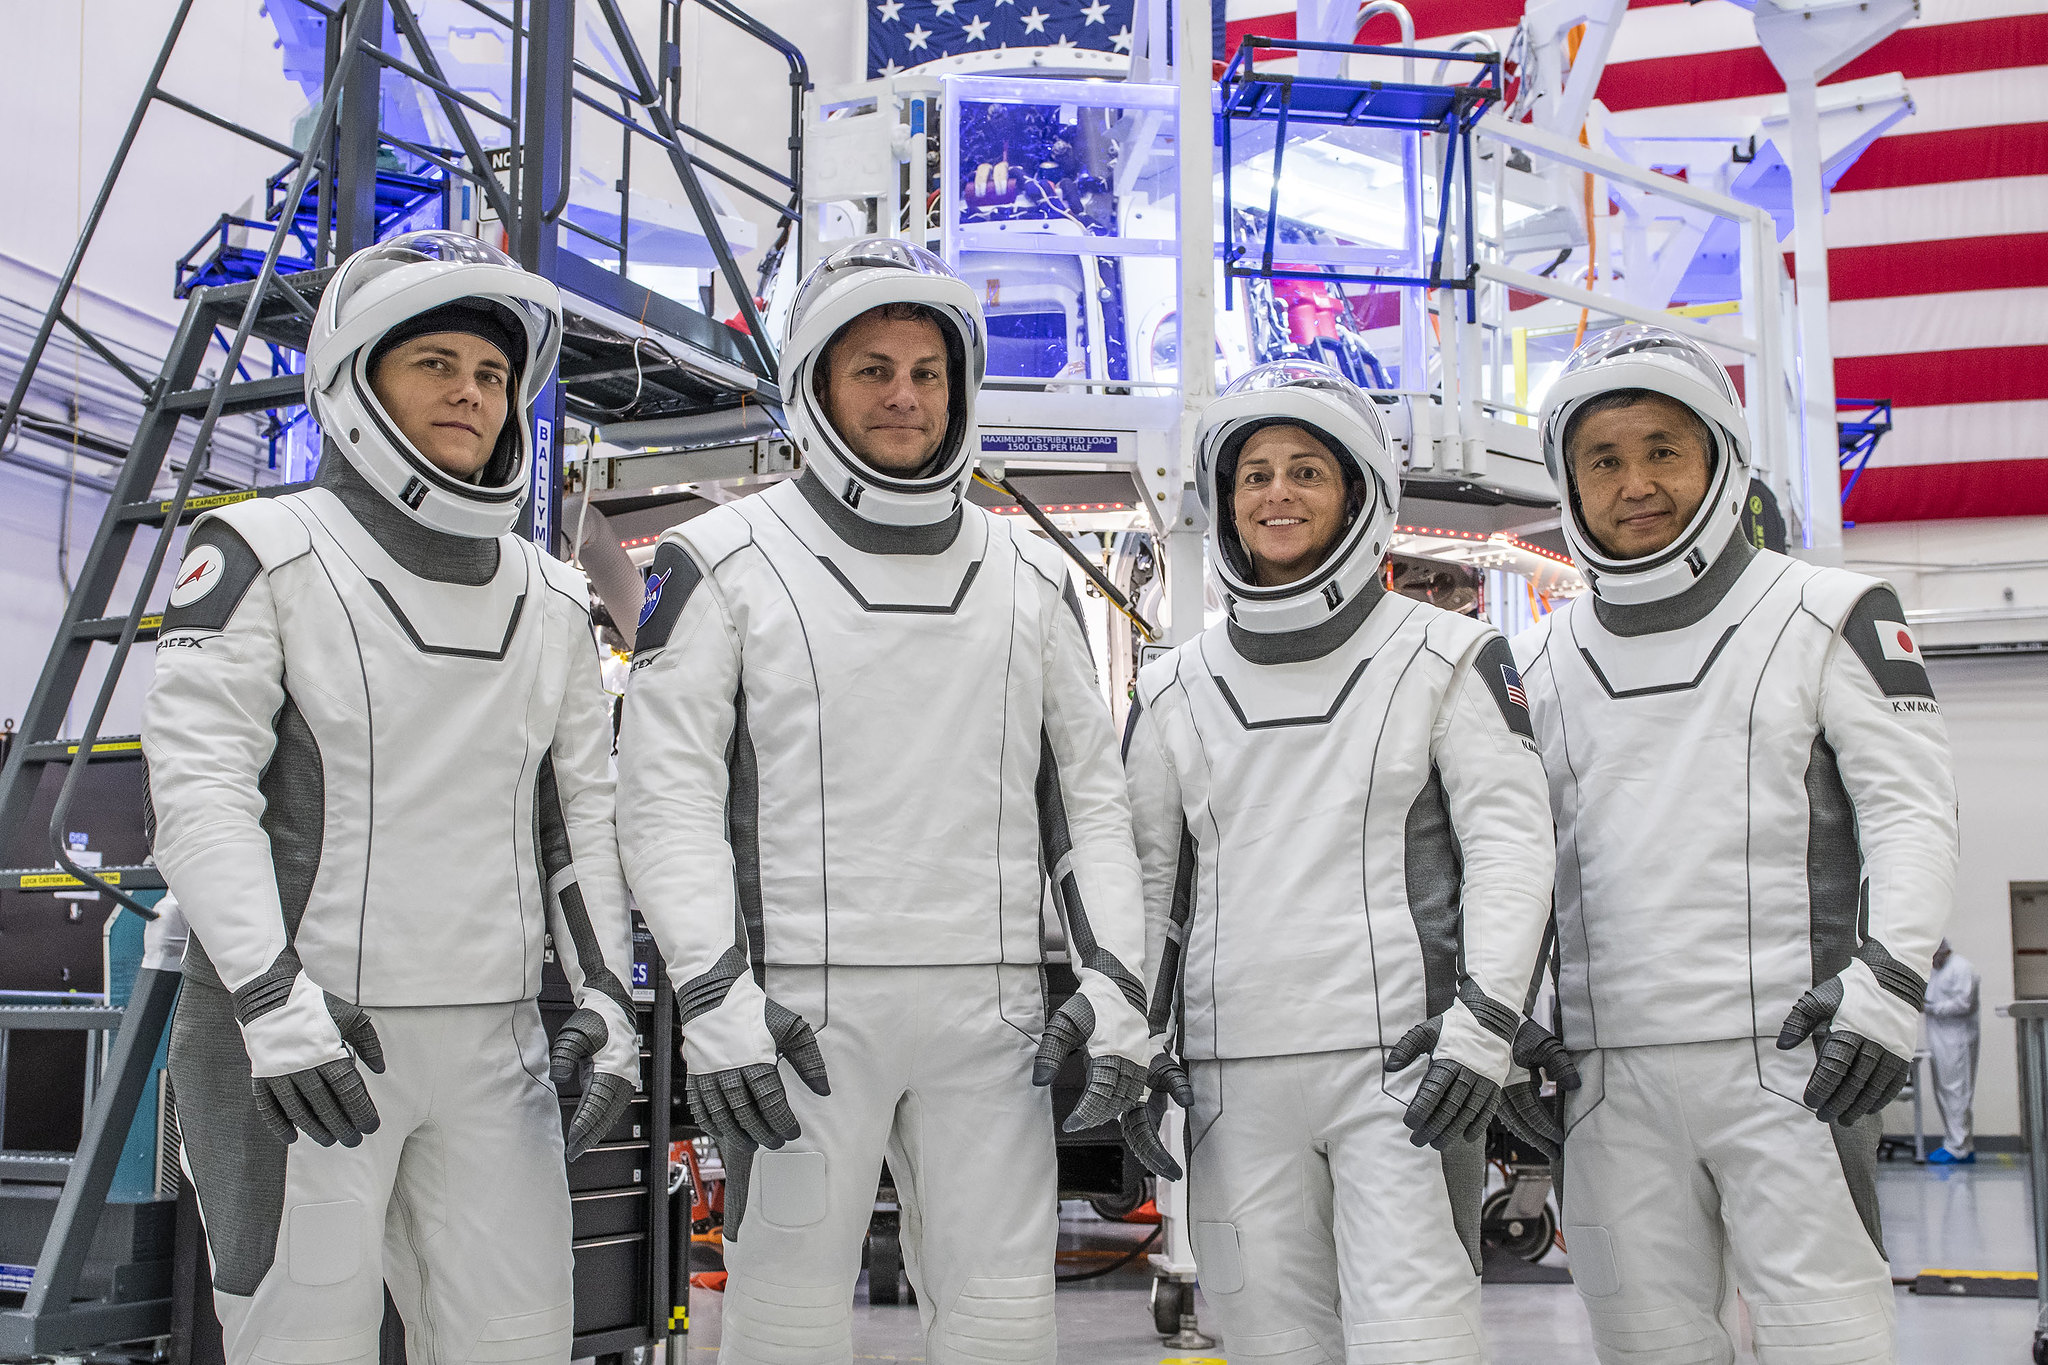 SpaceX Crew-5 astronauts standing in a row with spacesuits, in front of unidentified space hardware and an American flag on the wall